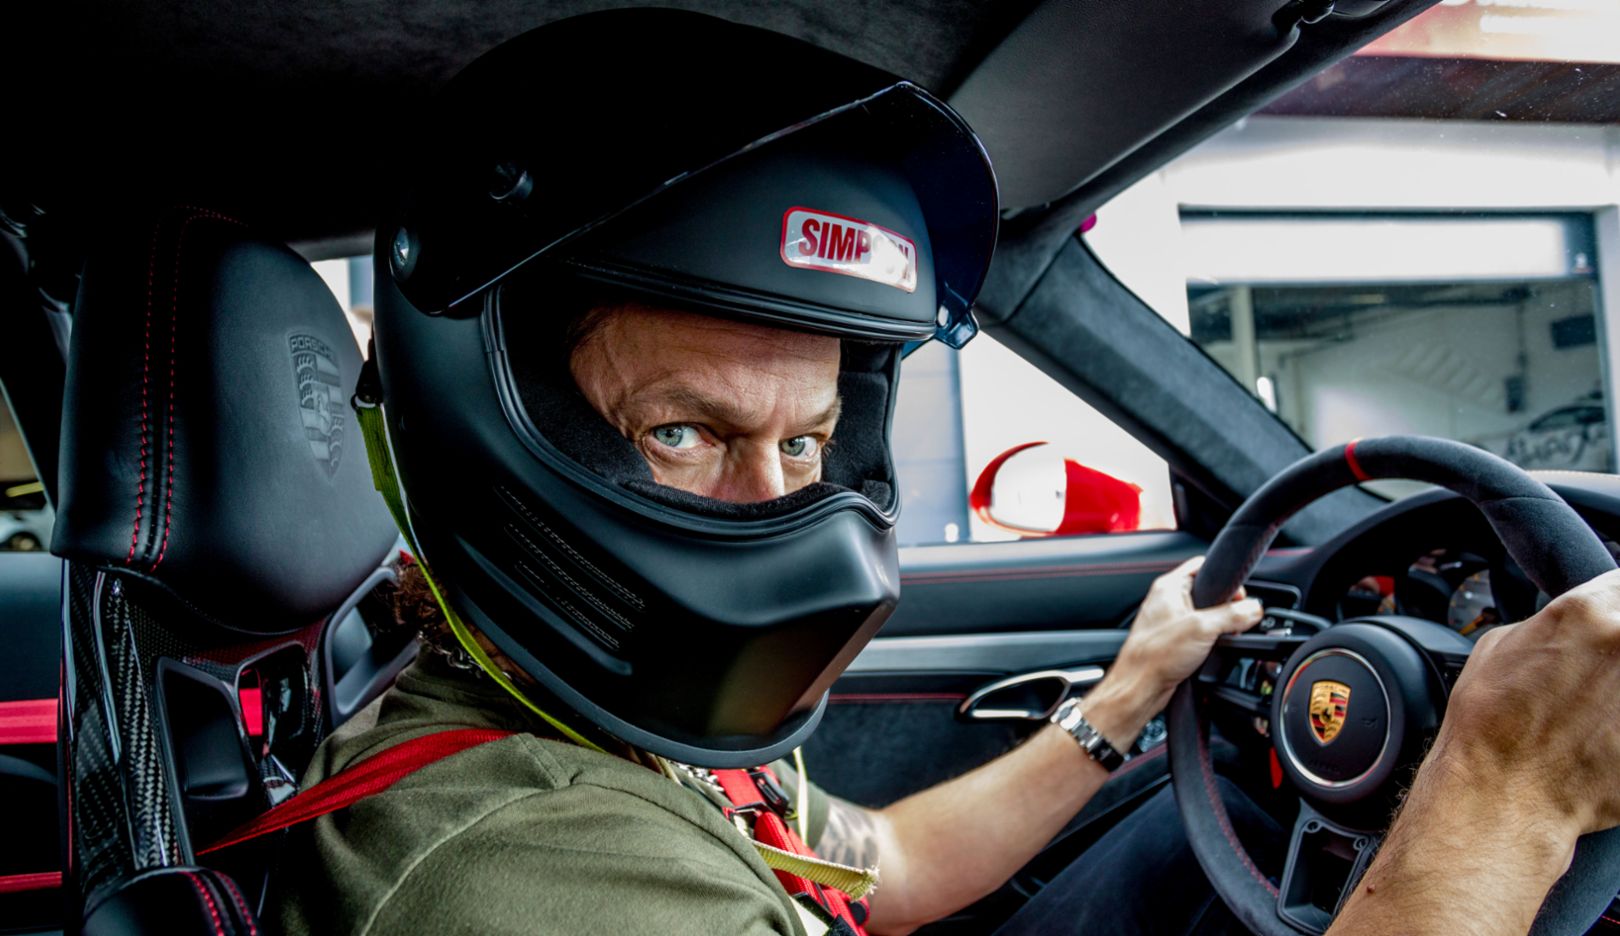 Tension and anticipation are clear to see on Sigurd Wongraven’s face; he sets himself high standards on the racetrack. 